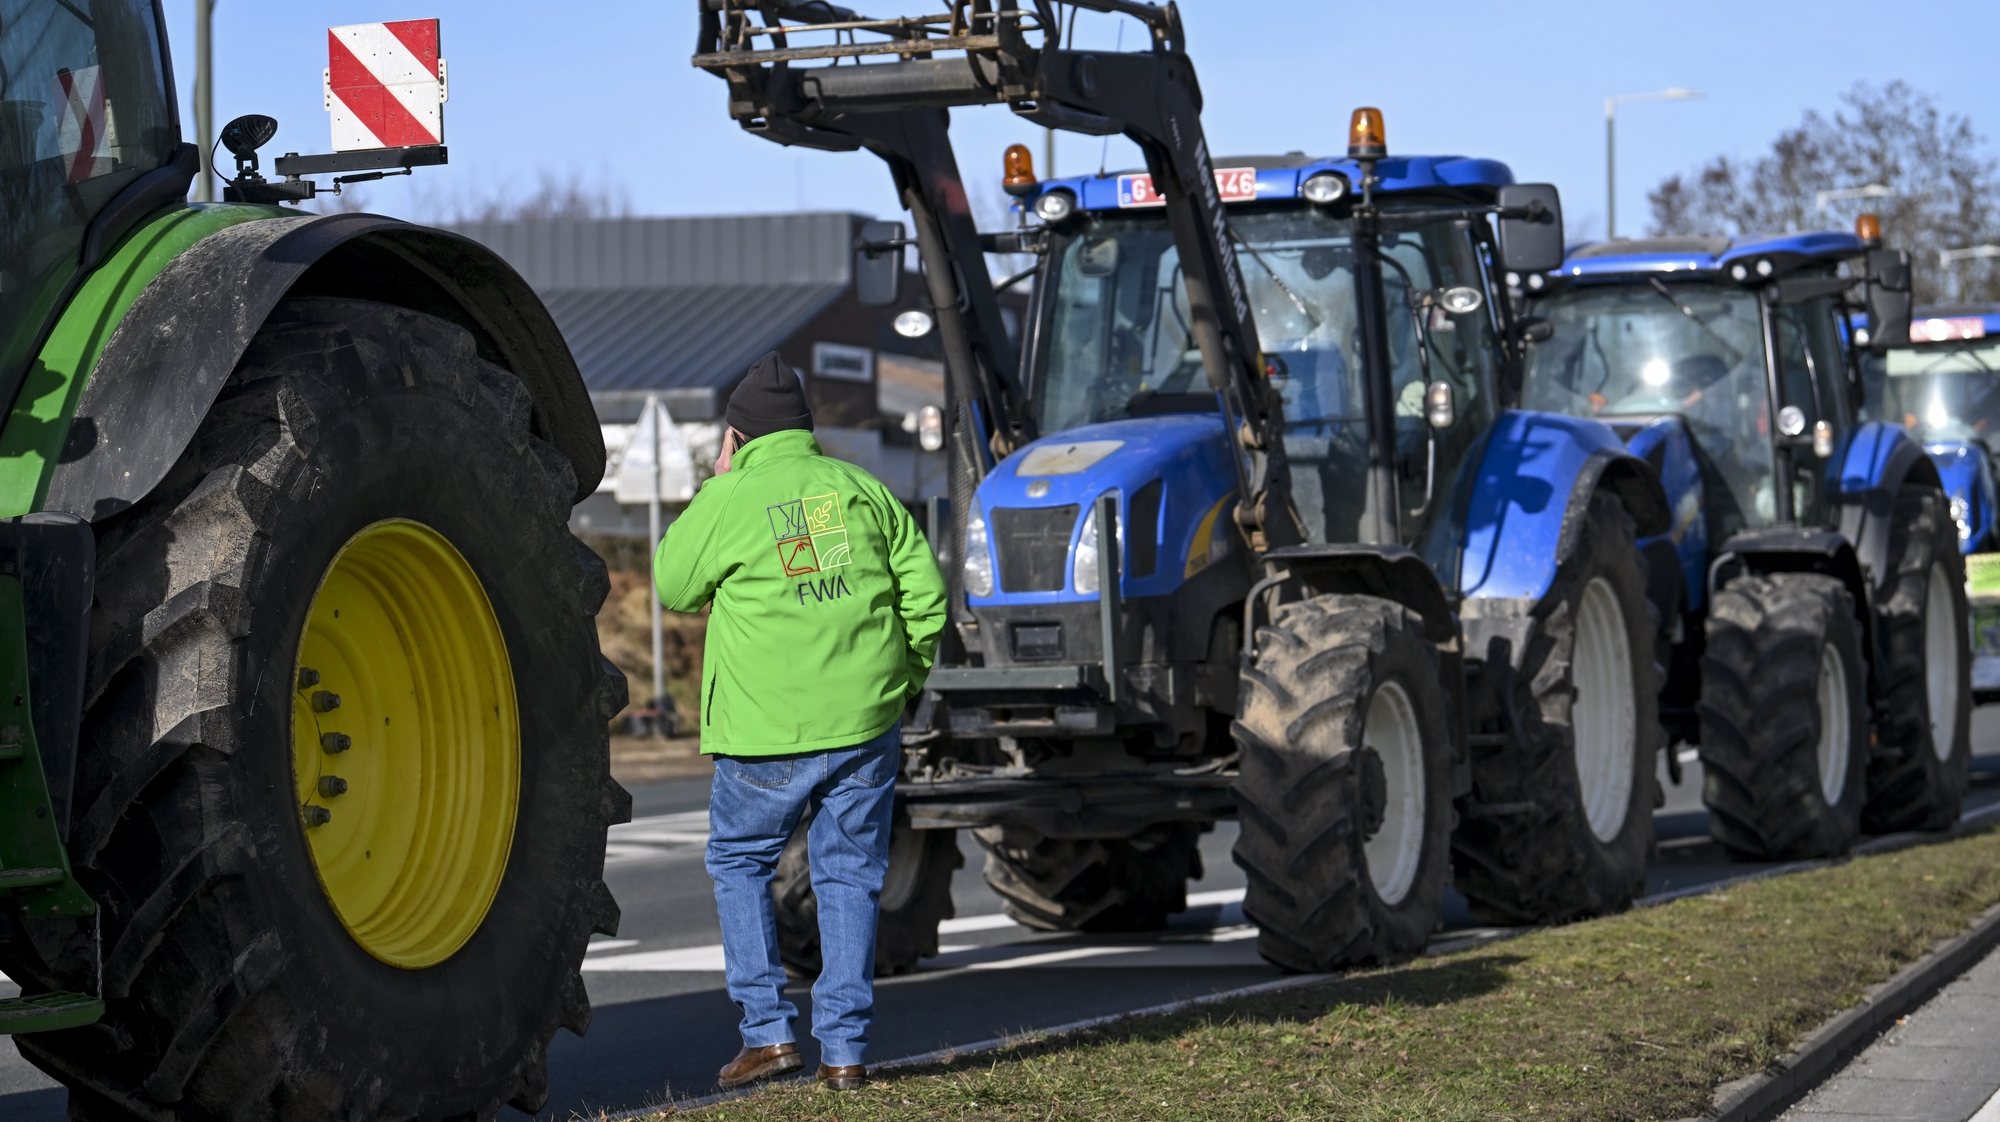 epa11108327 Farmers use their tractors to put up filtering roadblock during a protest action at a Walloon roundabout at Mont-Saint-Guibert, Belgium, 27 January 2024. The agricultural sector aims to highlight through these actions declining incomes, overly complex legislation, and administrative overload. The discontent among farmers, initially sparked in France, has spilled over into several European countries, including Belgium, particularly in the Walloon region.  EPA/FREDERIC SIERAKOWSKI